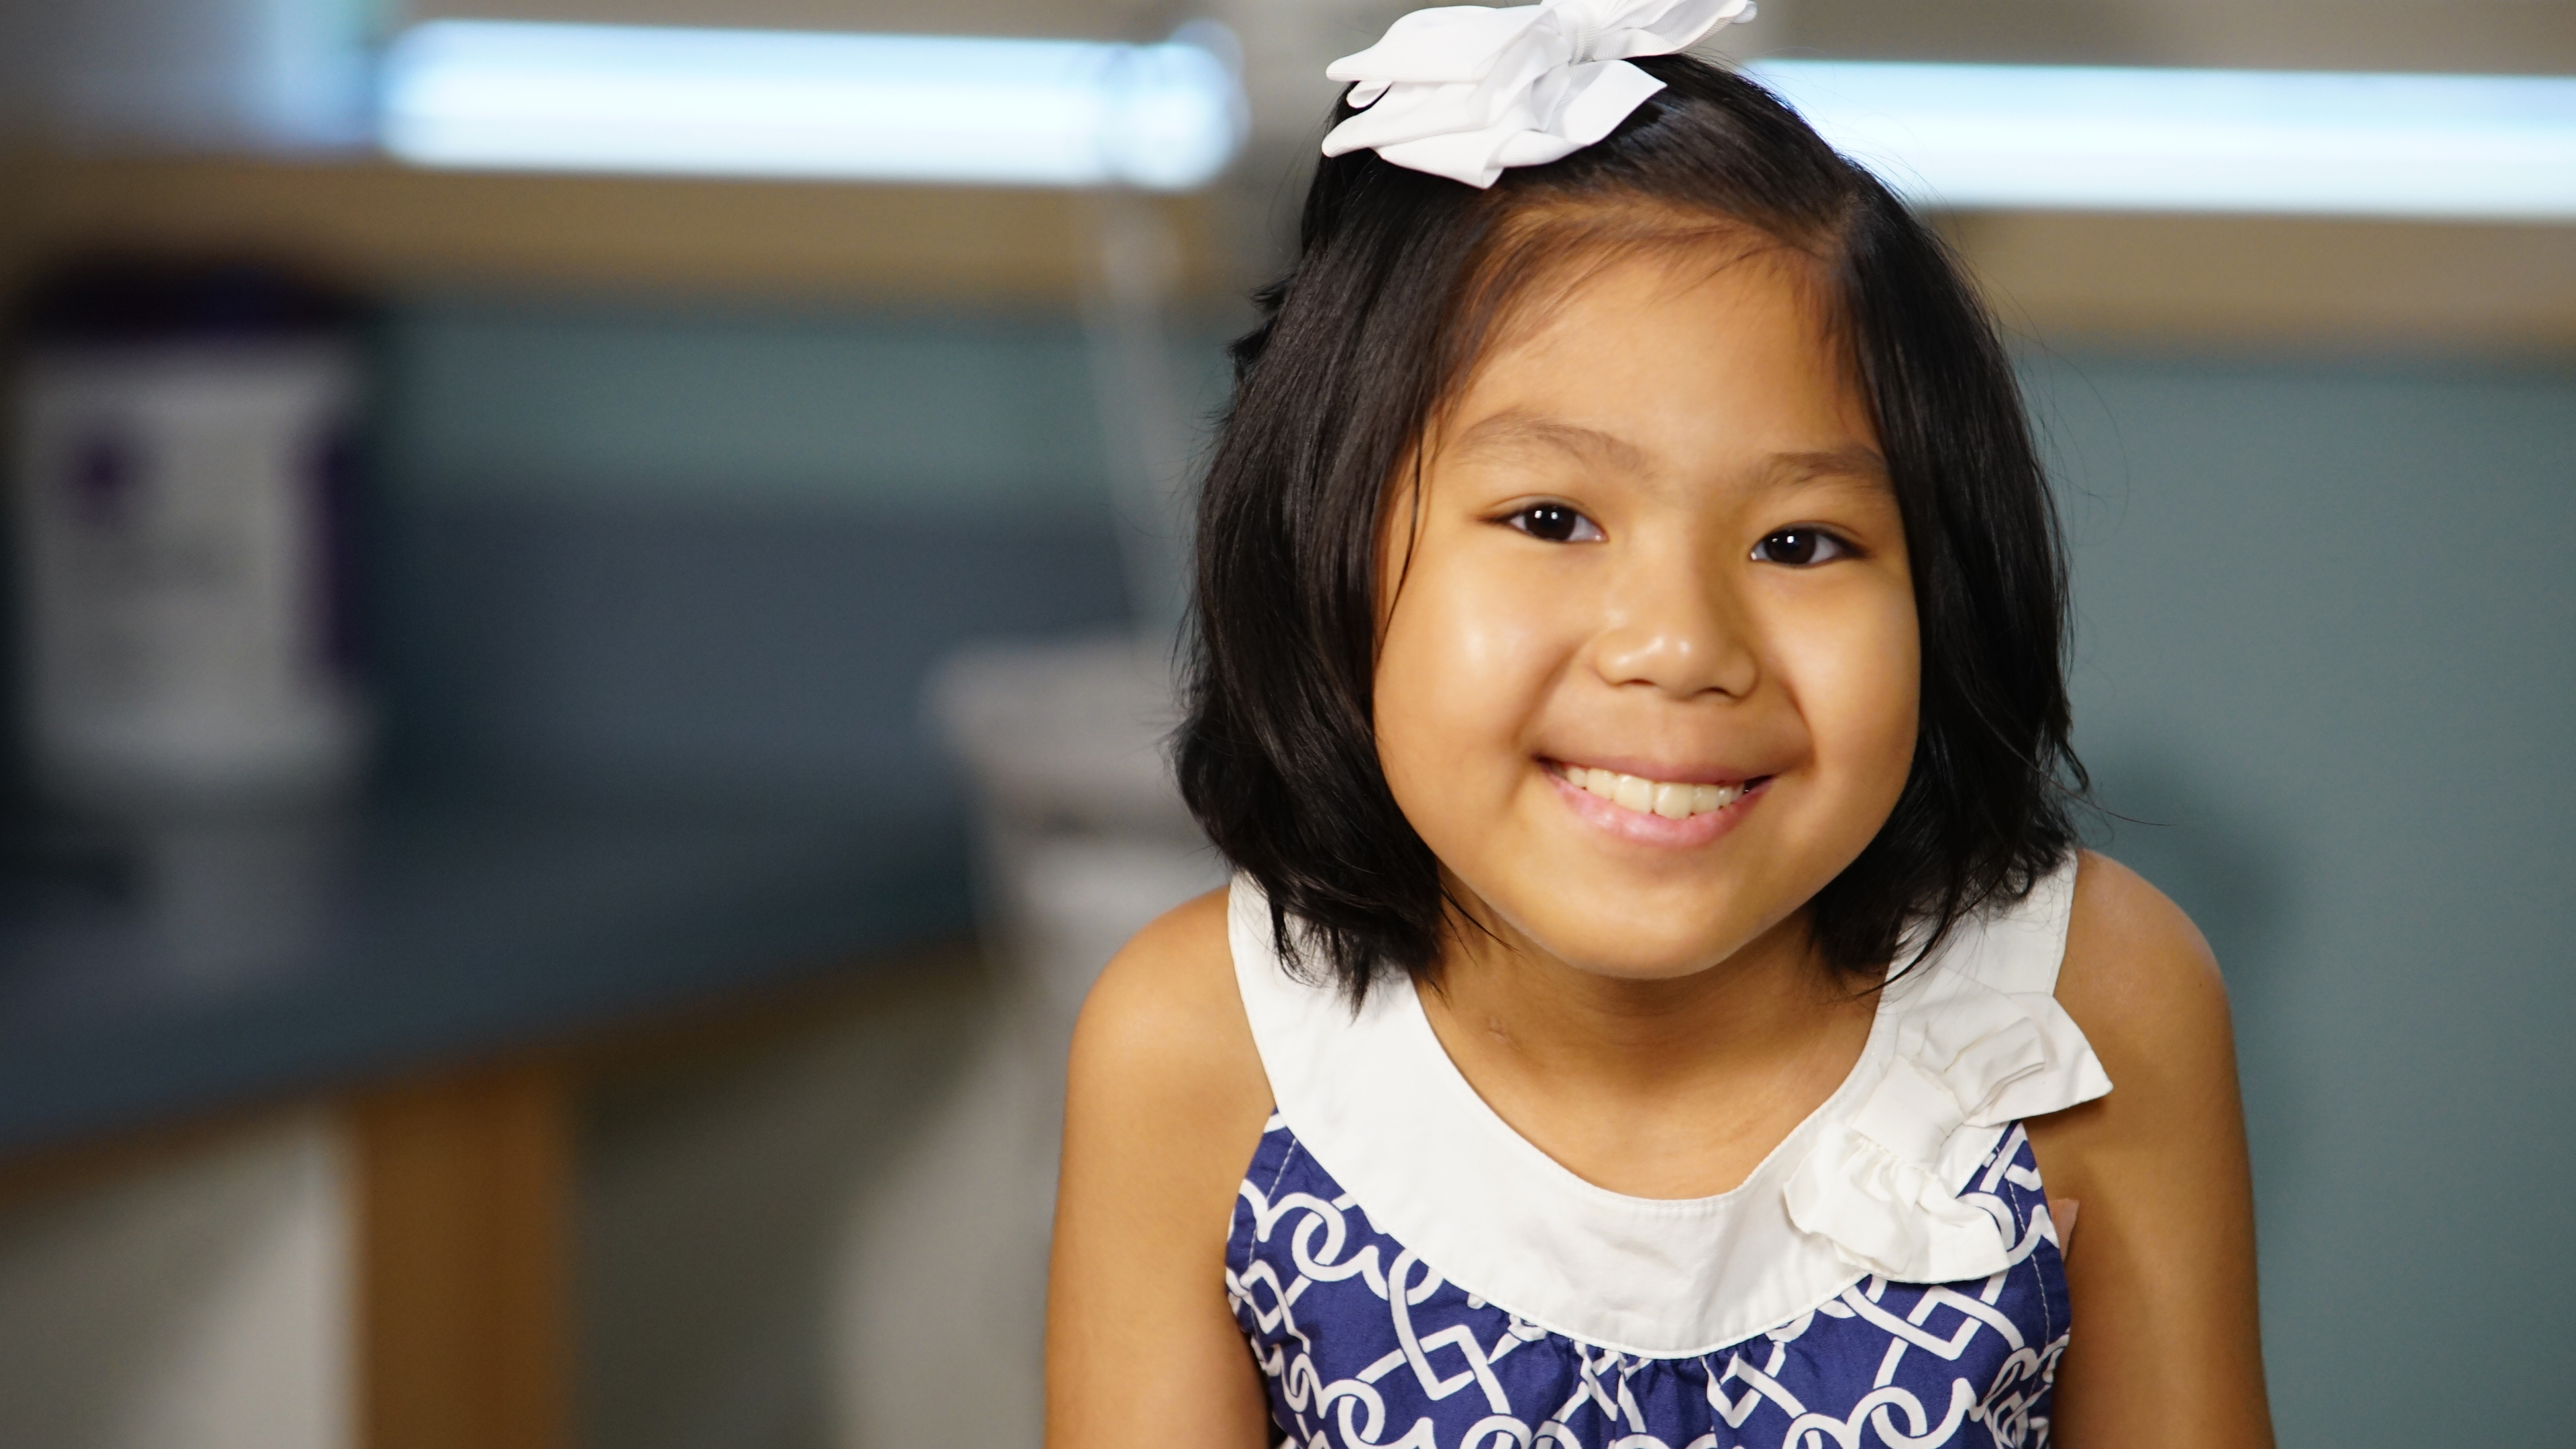 Mya McKenzie Nguyen is only 9 years old, and she has already beaten cancer six times. How? With the heart and courage of a lion – plus a nationwide search for new treatments that always led her family back home to LCH. 